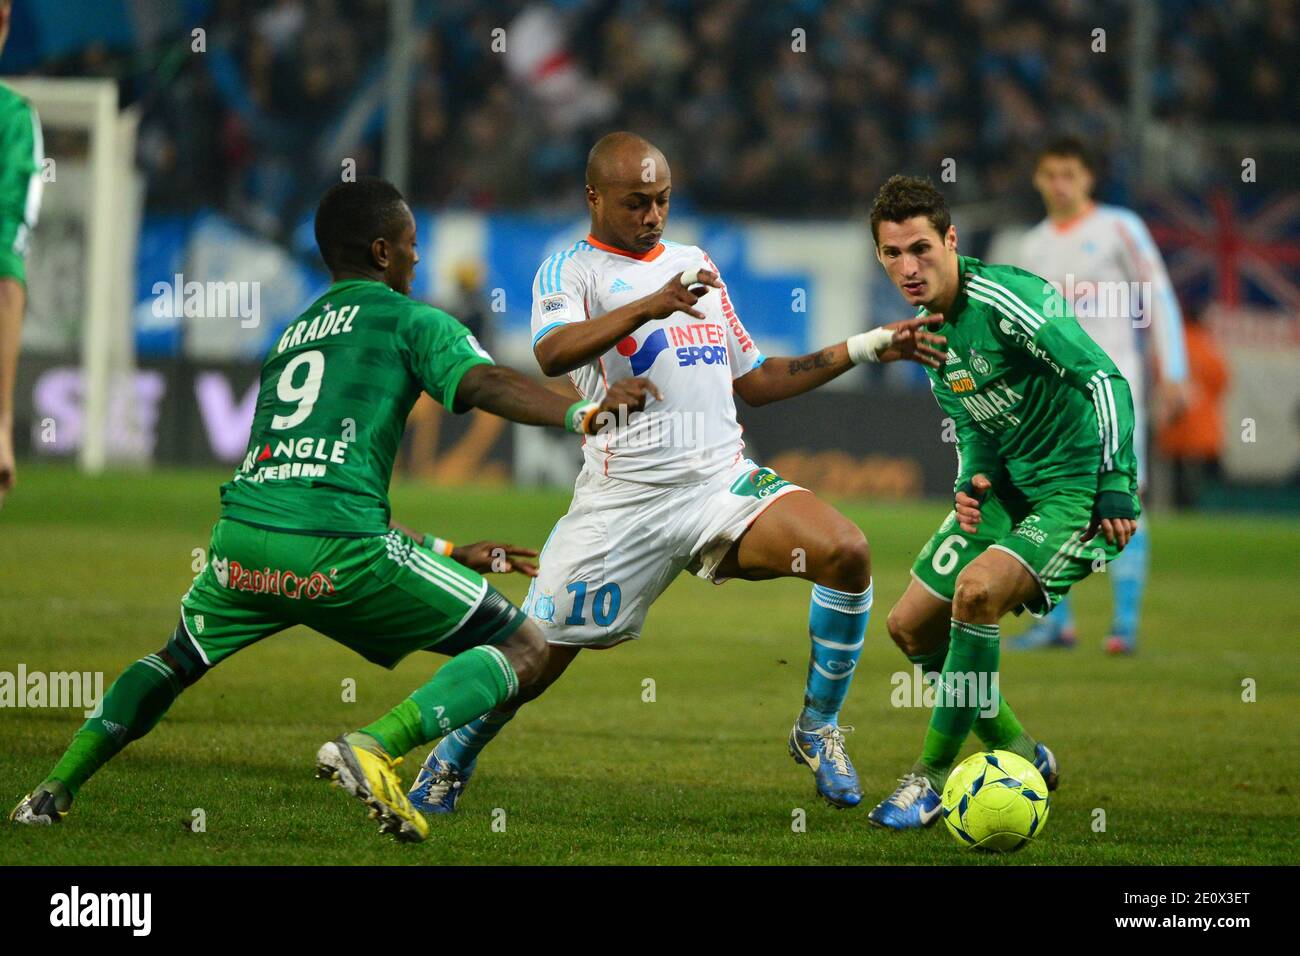 ASSE's Max Gradel, OM's Andre Ayew and ASSE's Jeremy Clement during the French First League soccer match, Olympique de Marseille Vs As Saint-Etienne at Velodrome stadium in Marseille, France on December 23, 2012. OM won 1-0. Photo by Felix Golesi/ABACAPRESS.COM Stock Photo